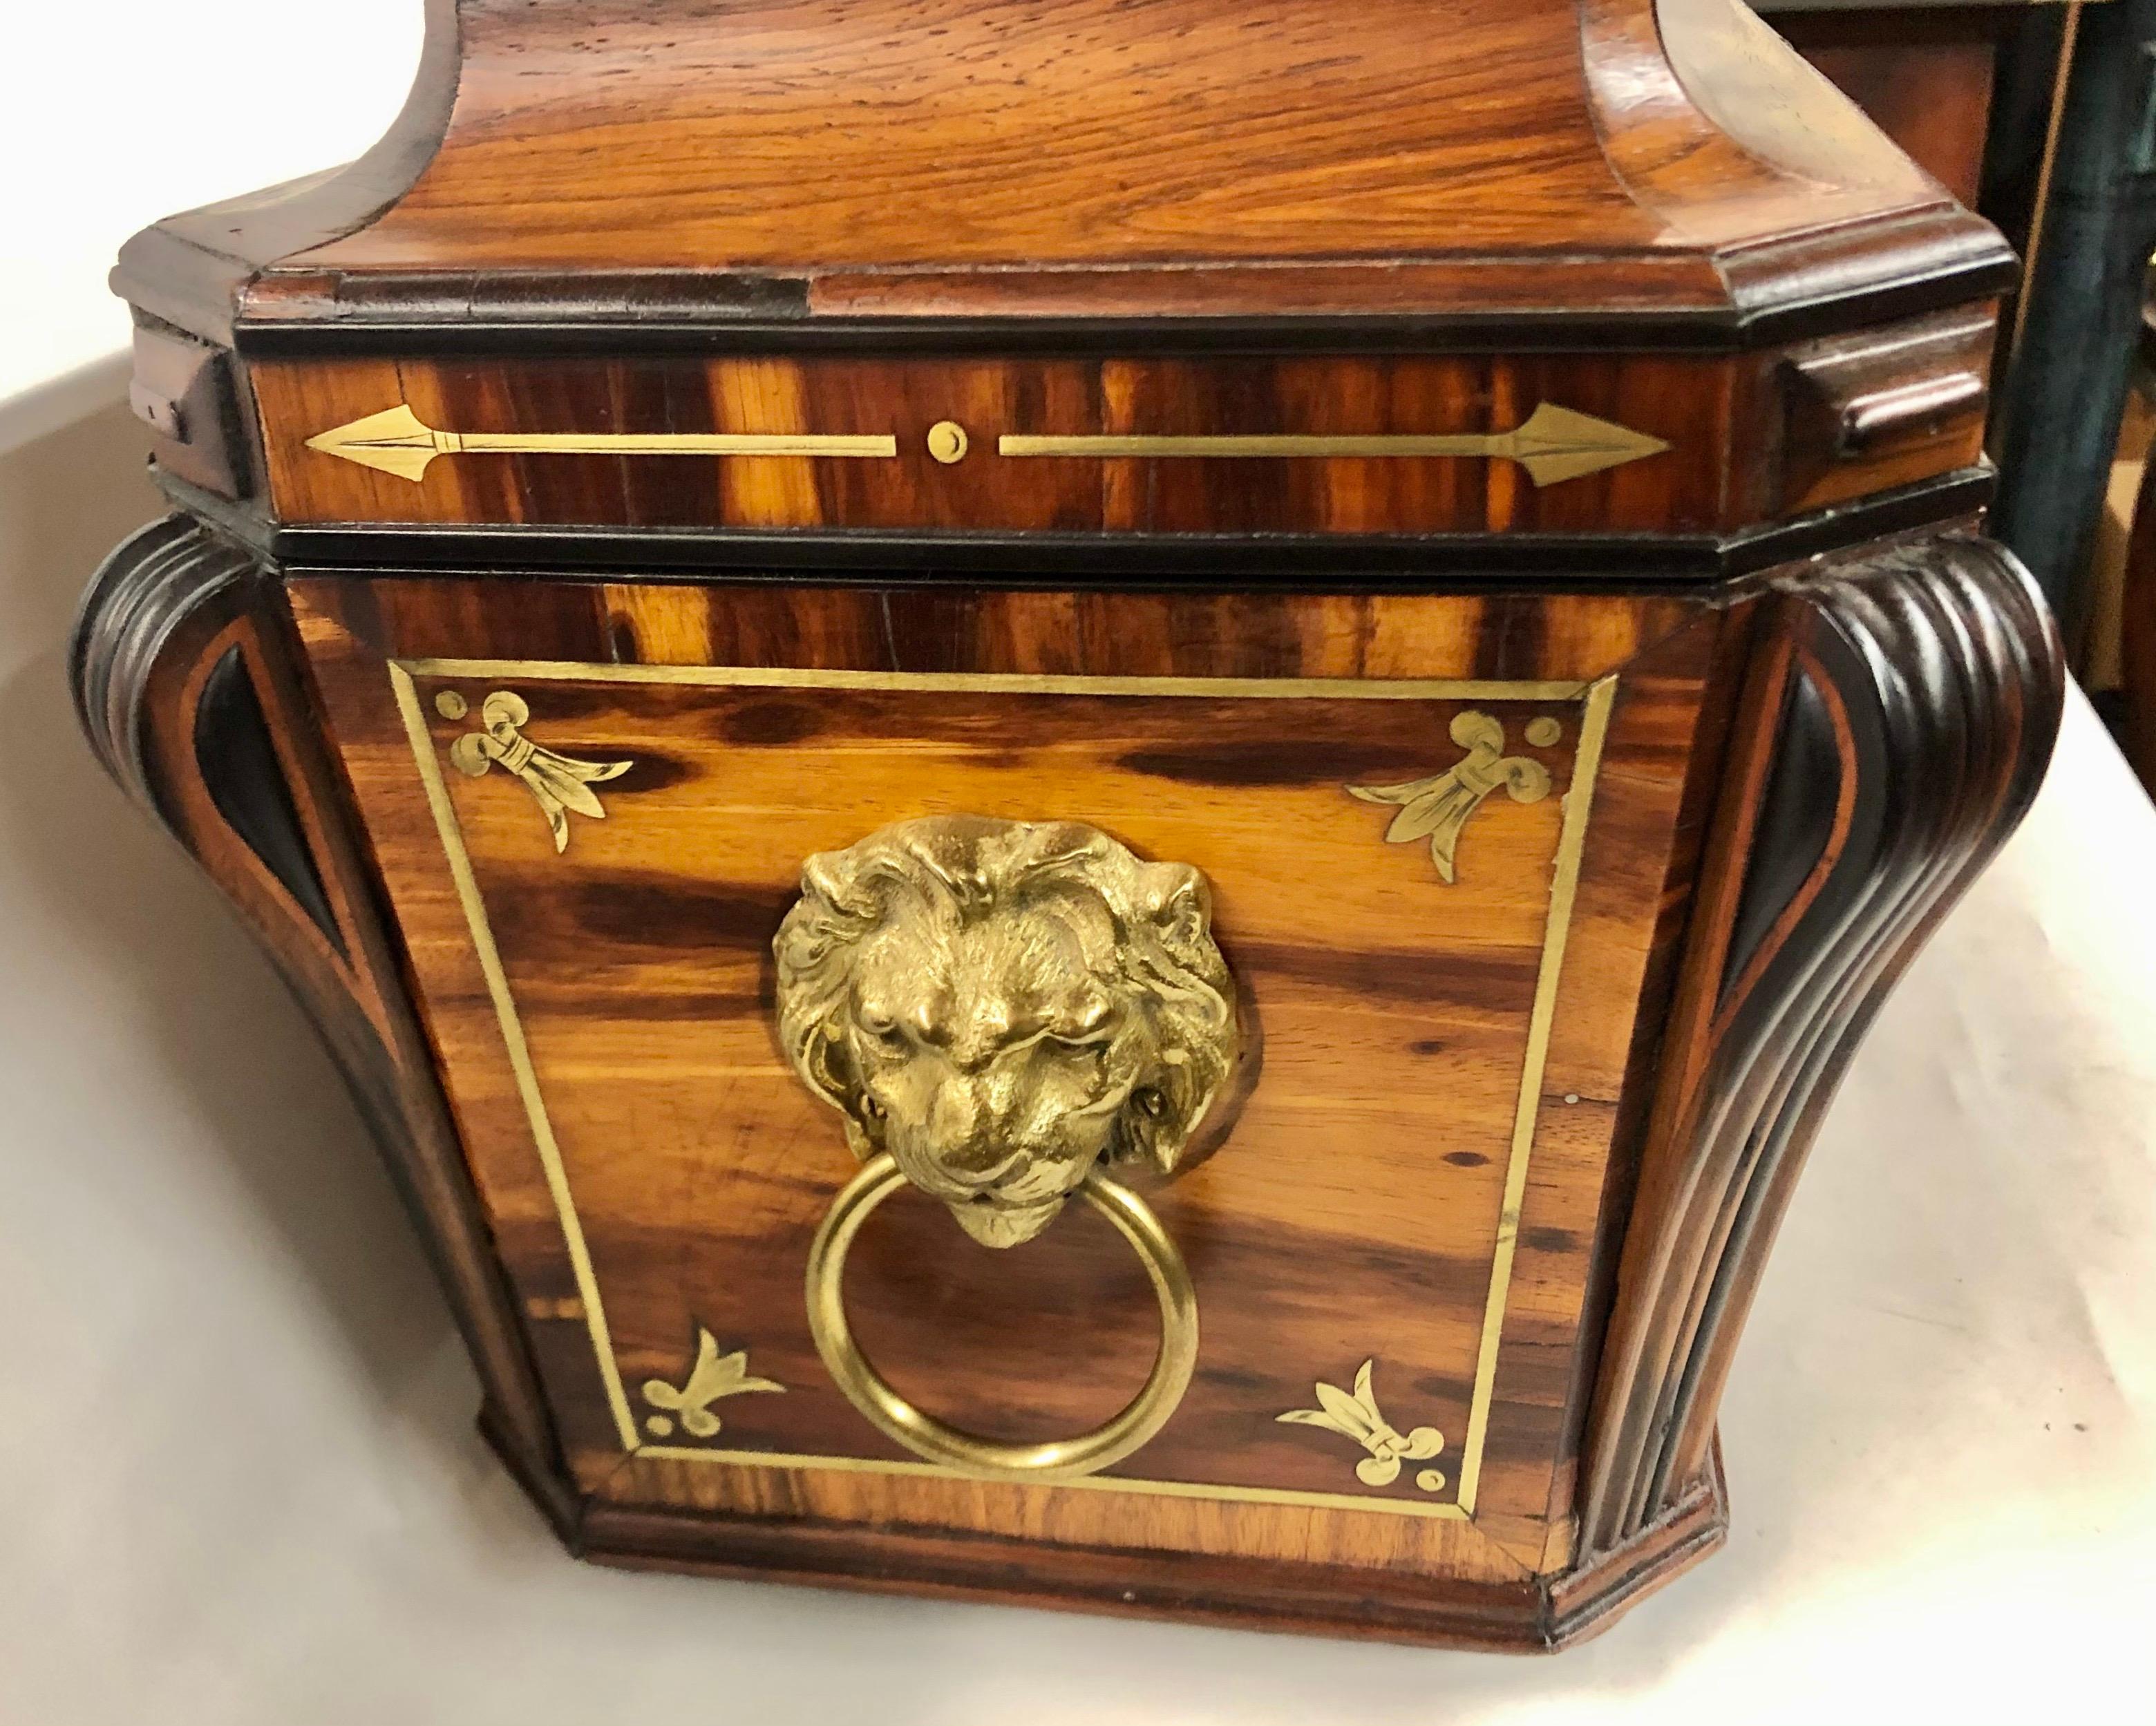 Monumental Antique English Regency Brass Inlaid Rosewood Sarcophagus Tea Caddy For Sale 3